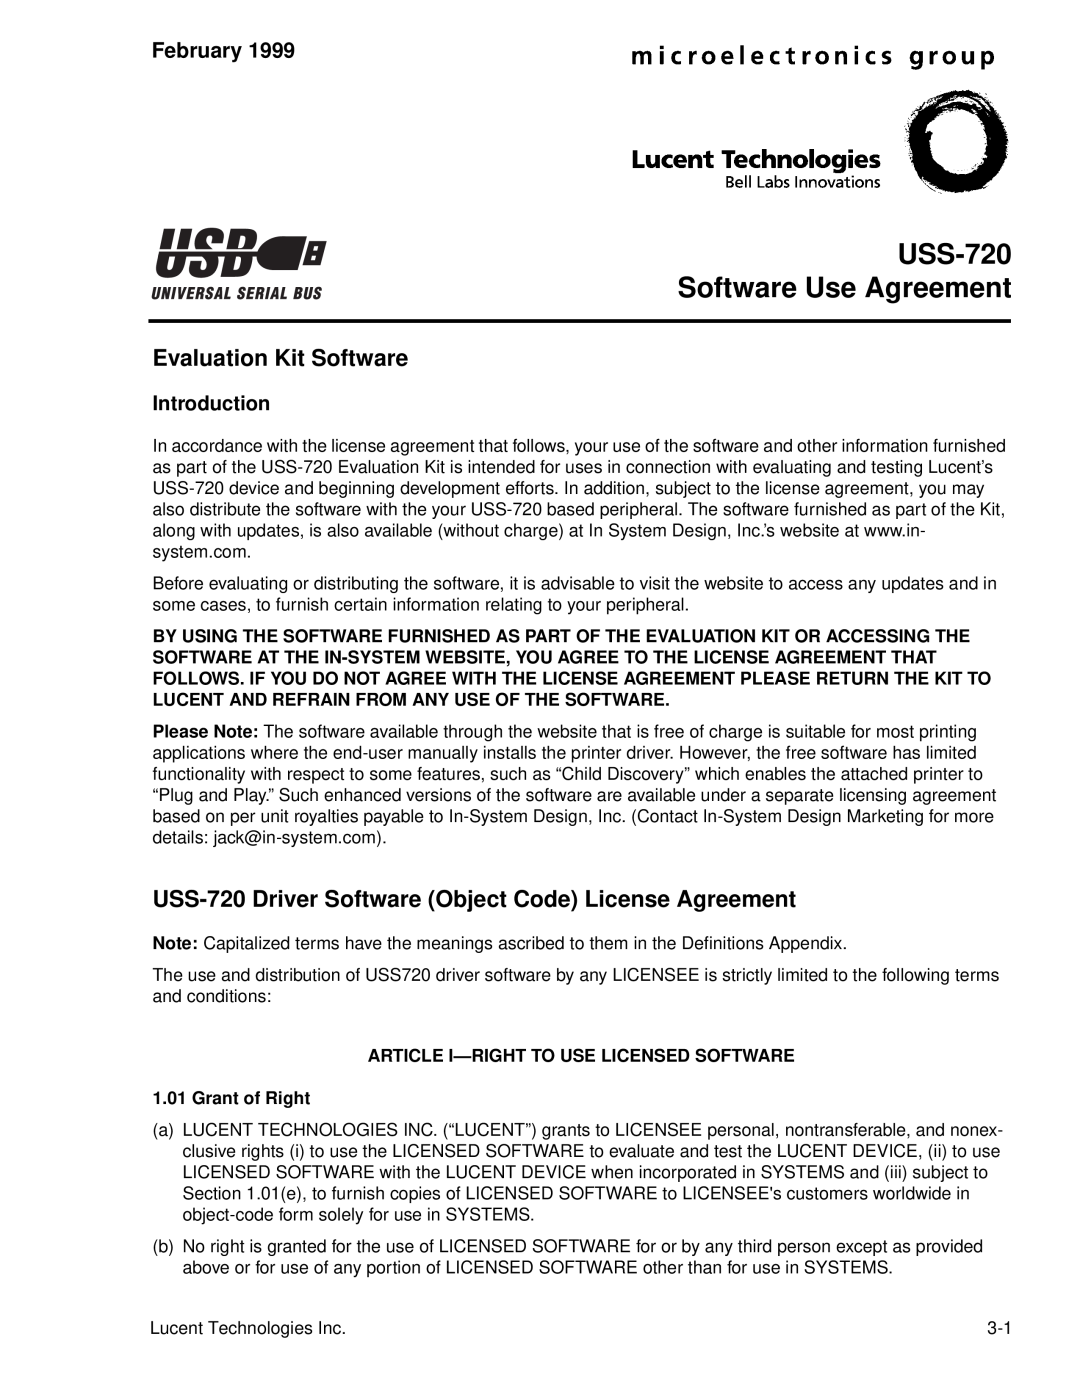 Lucent Technologies manual USS-720 Software Use Agreement, Evaluation Kit Software, February, Introduction 